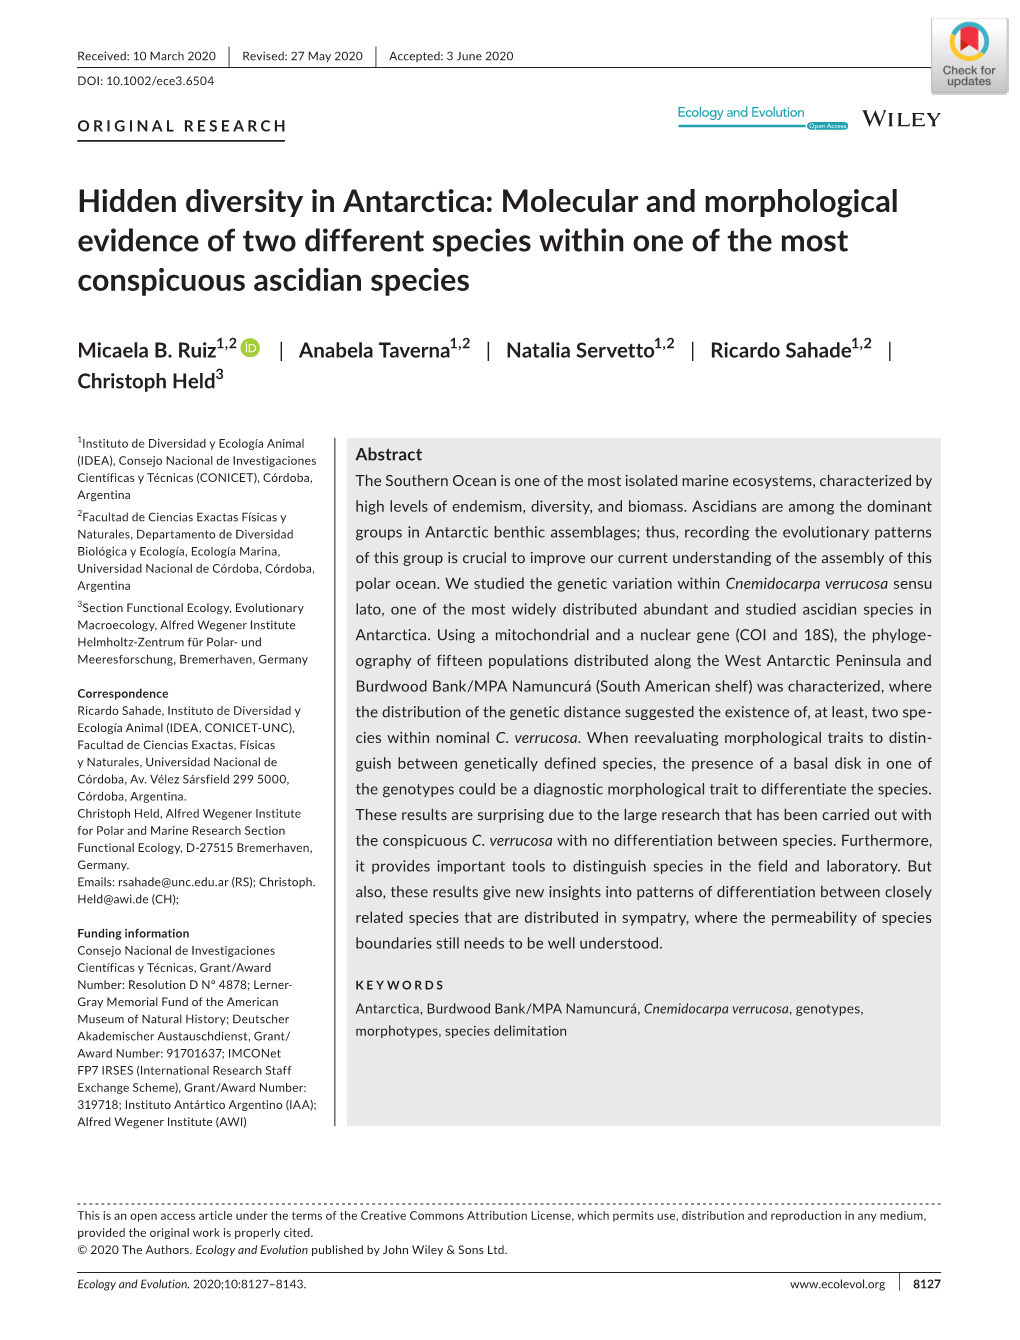 Hidden Diversity in Antarctica: Molecular and Morphological Evidence of Two Different Species Within One of the Most Conspicuous Ascidian Species